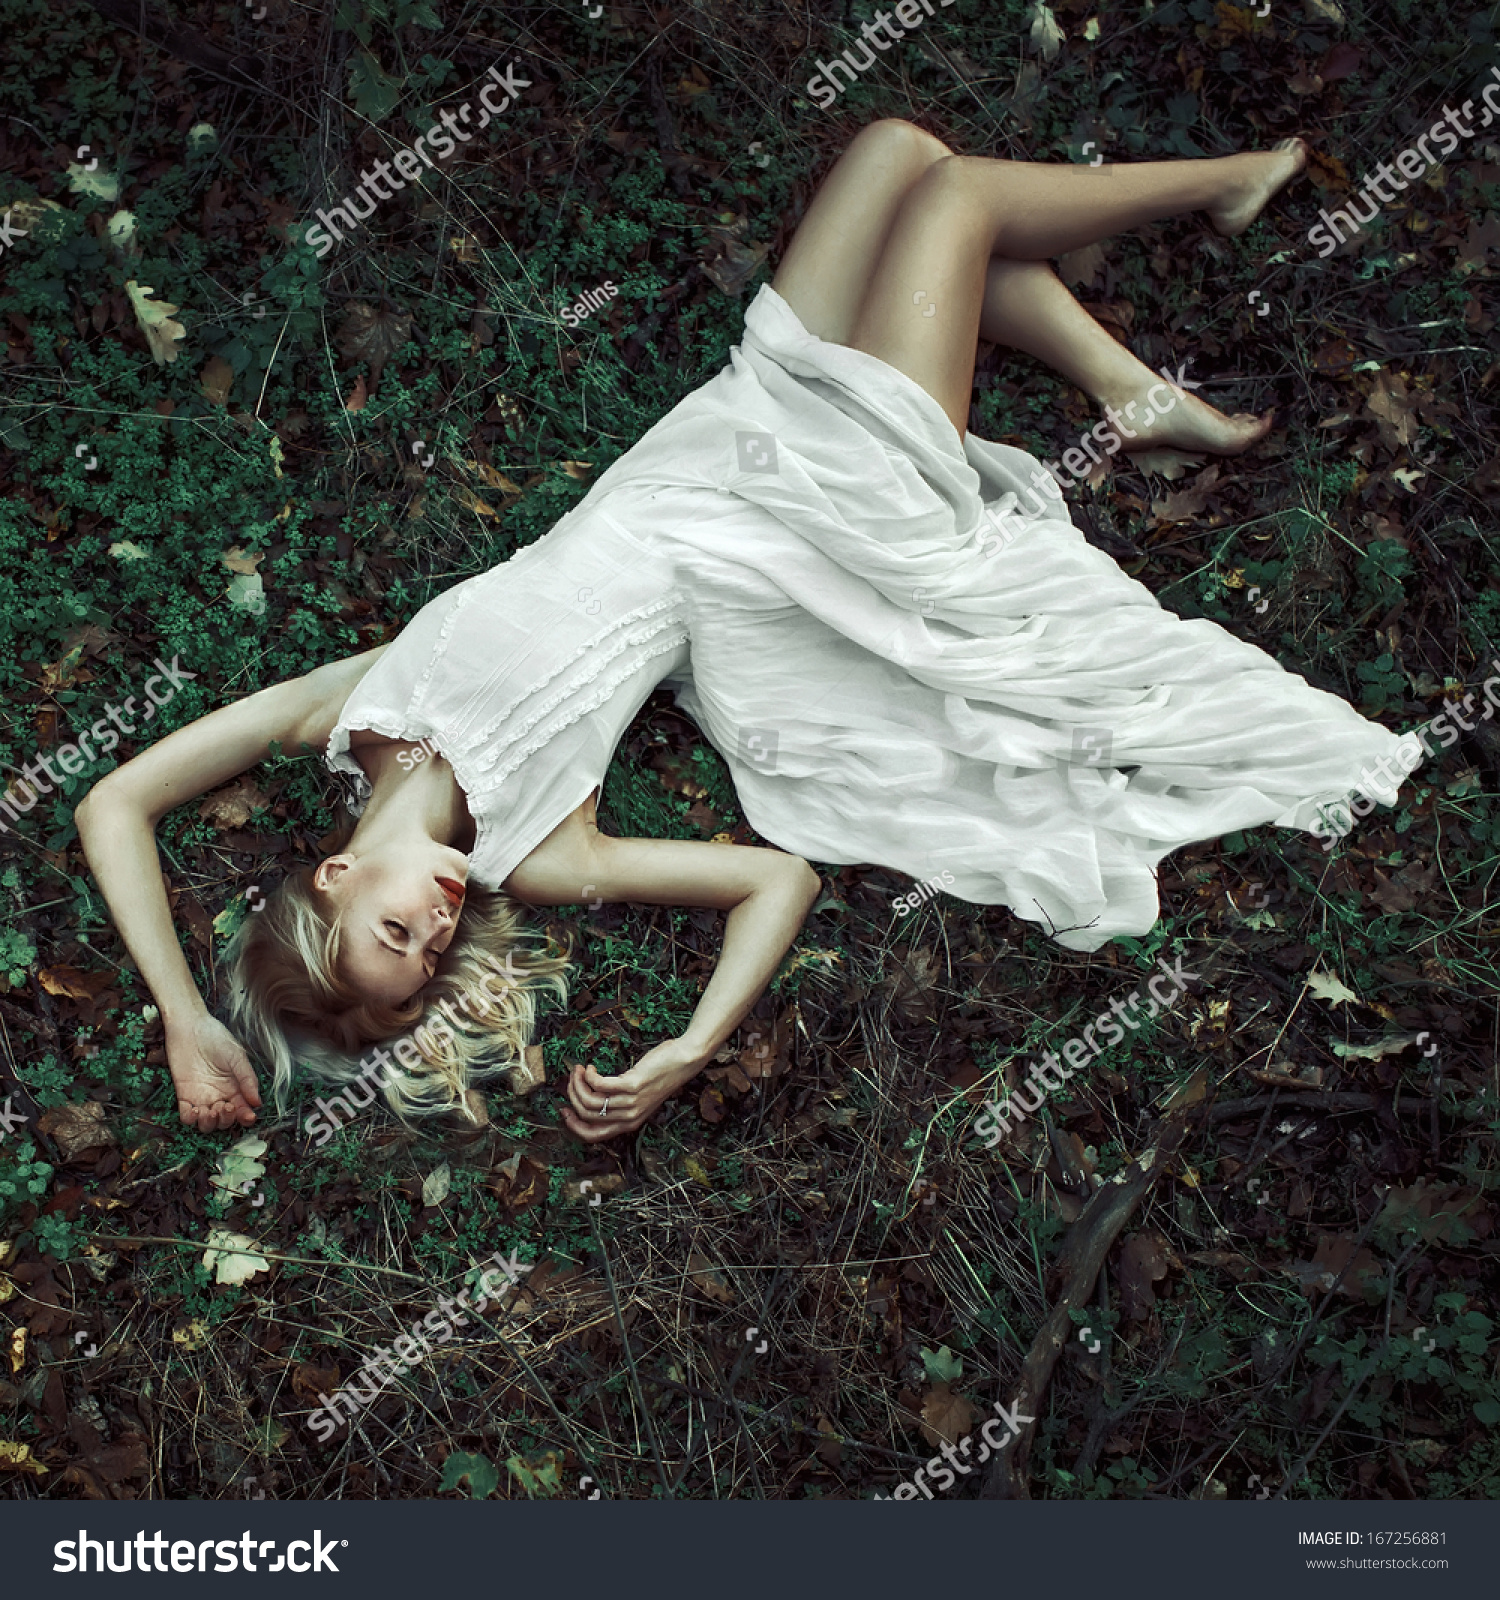 https://image.shutterstock.com/shutterstock/photos/167256881/display_1500/stock-photo-fairitale-scene-of-a-woman-laying-in-the-forest-167256881.jpg